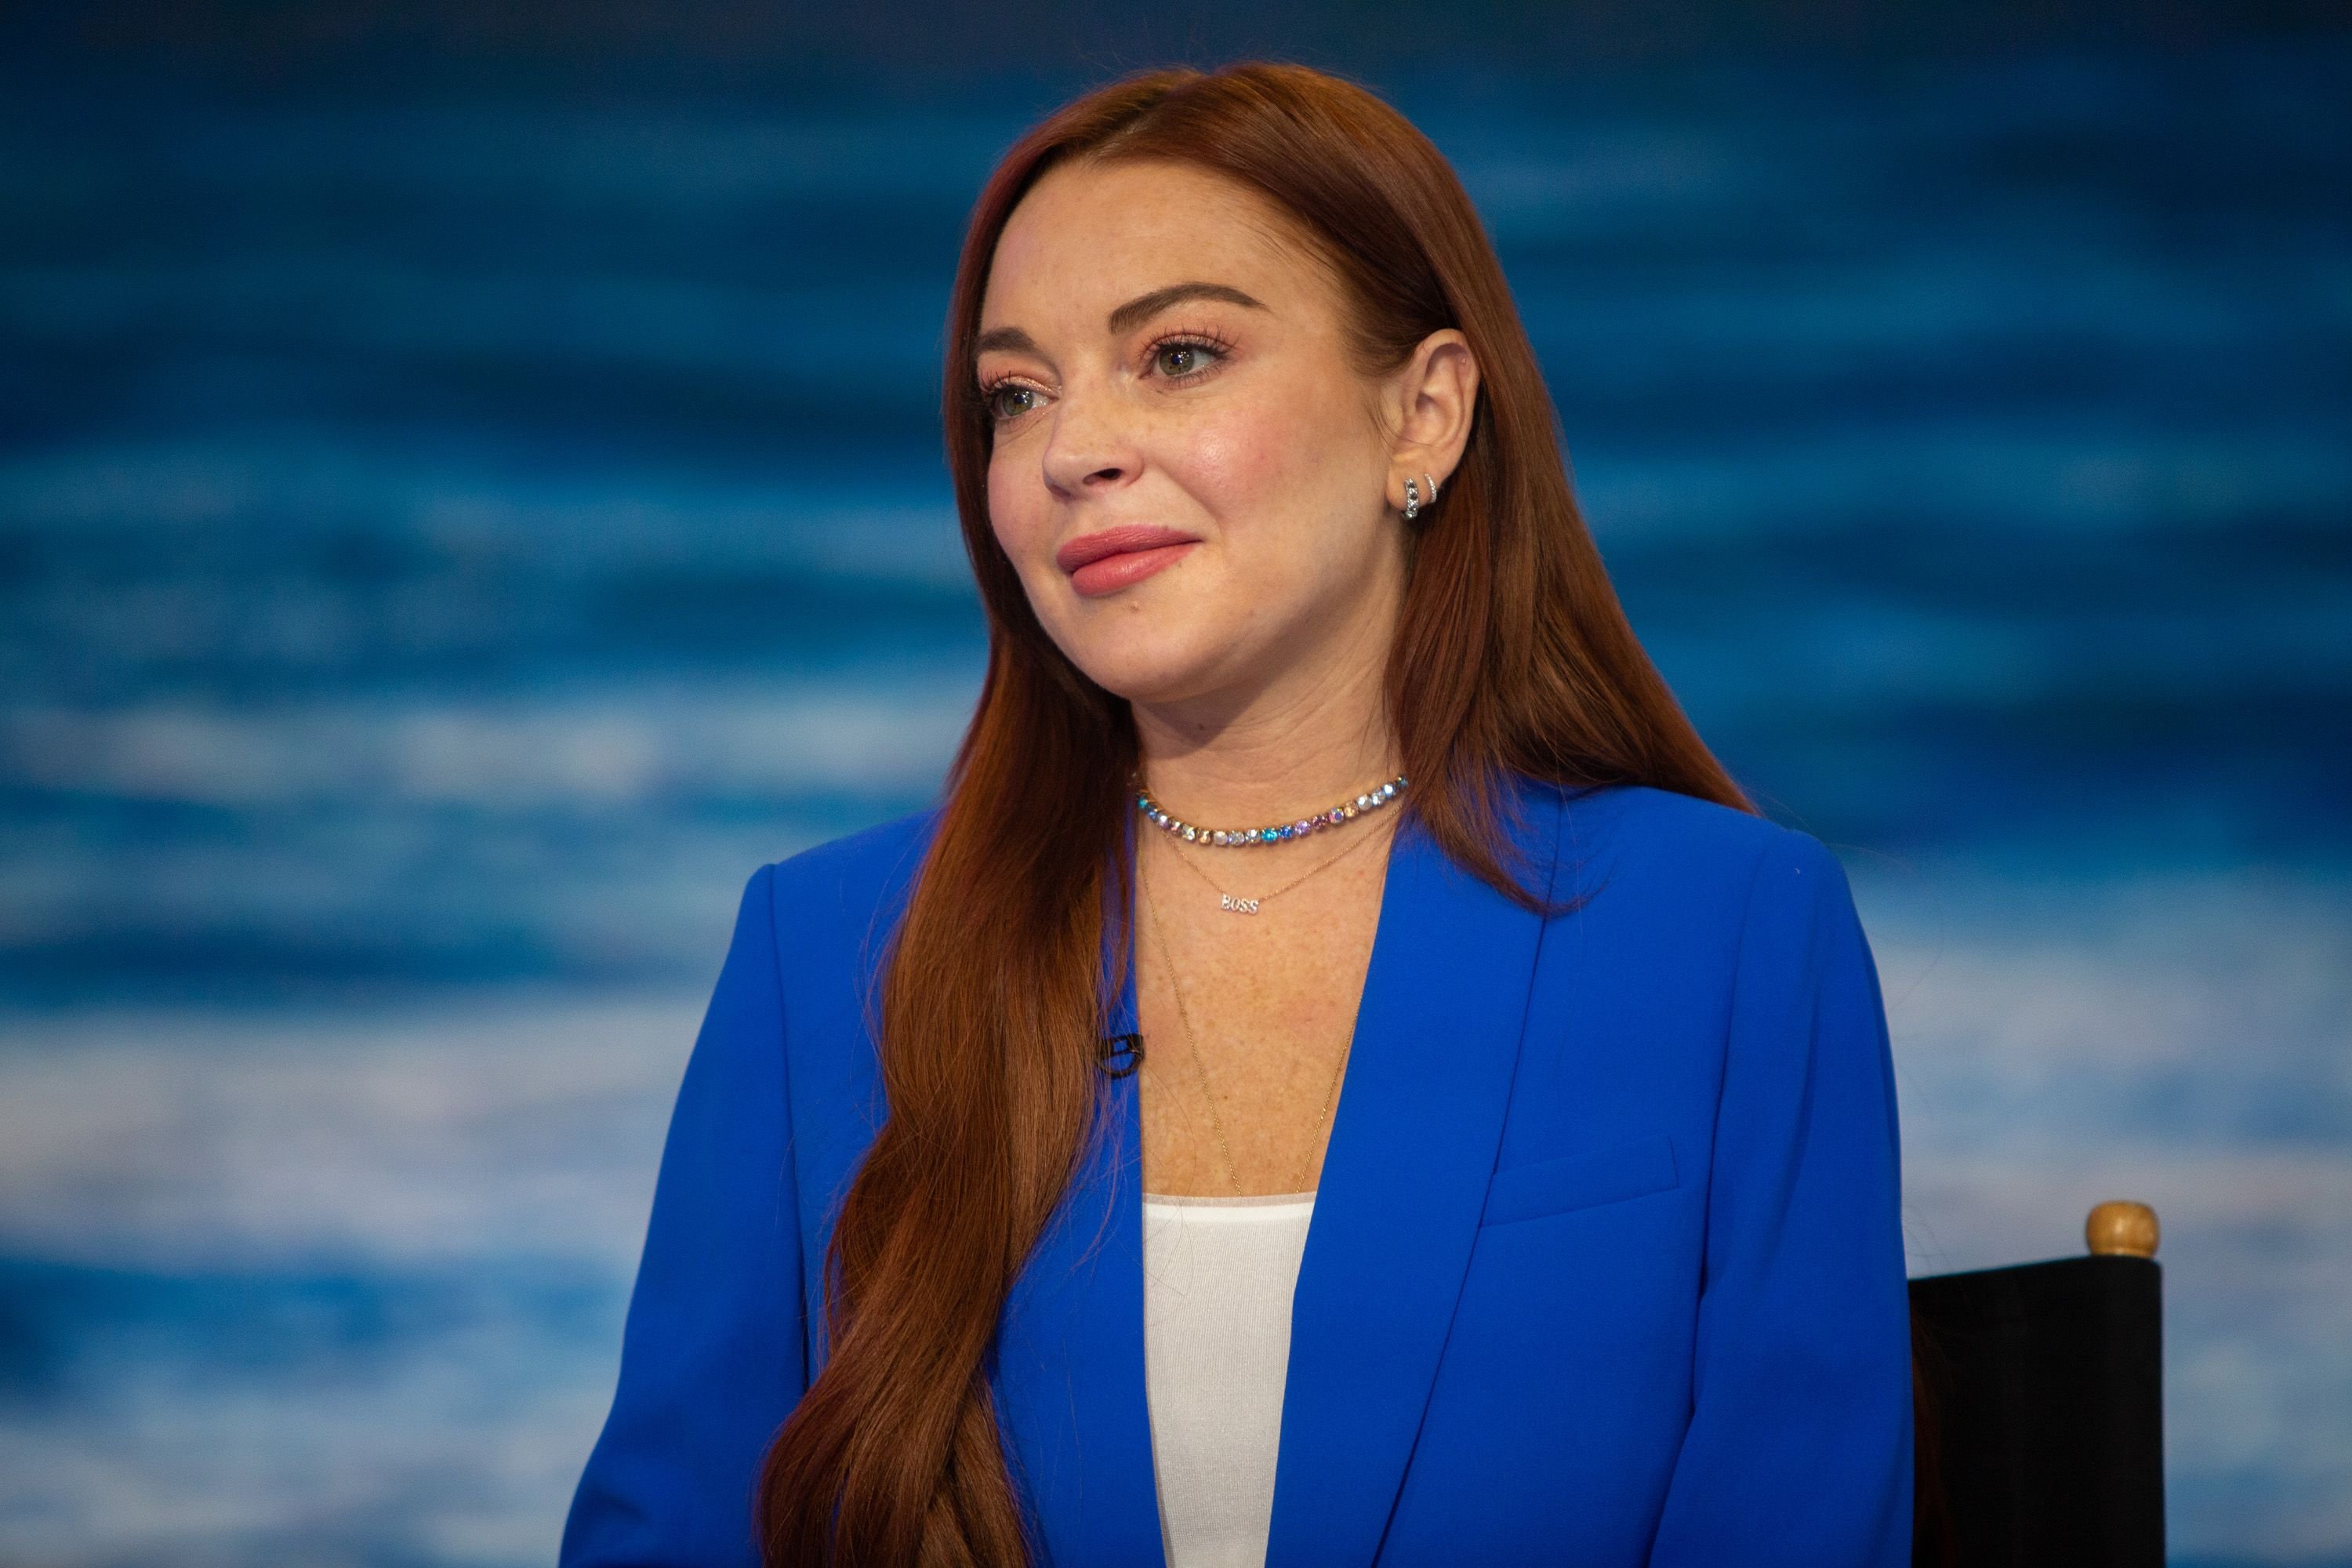 Lindsay Lohan on "Today" on January 11, 2019. | Photo: Getty Images